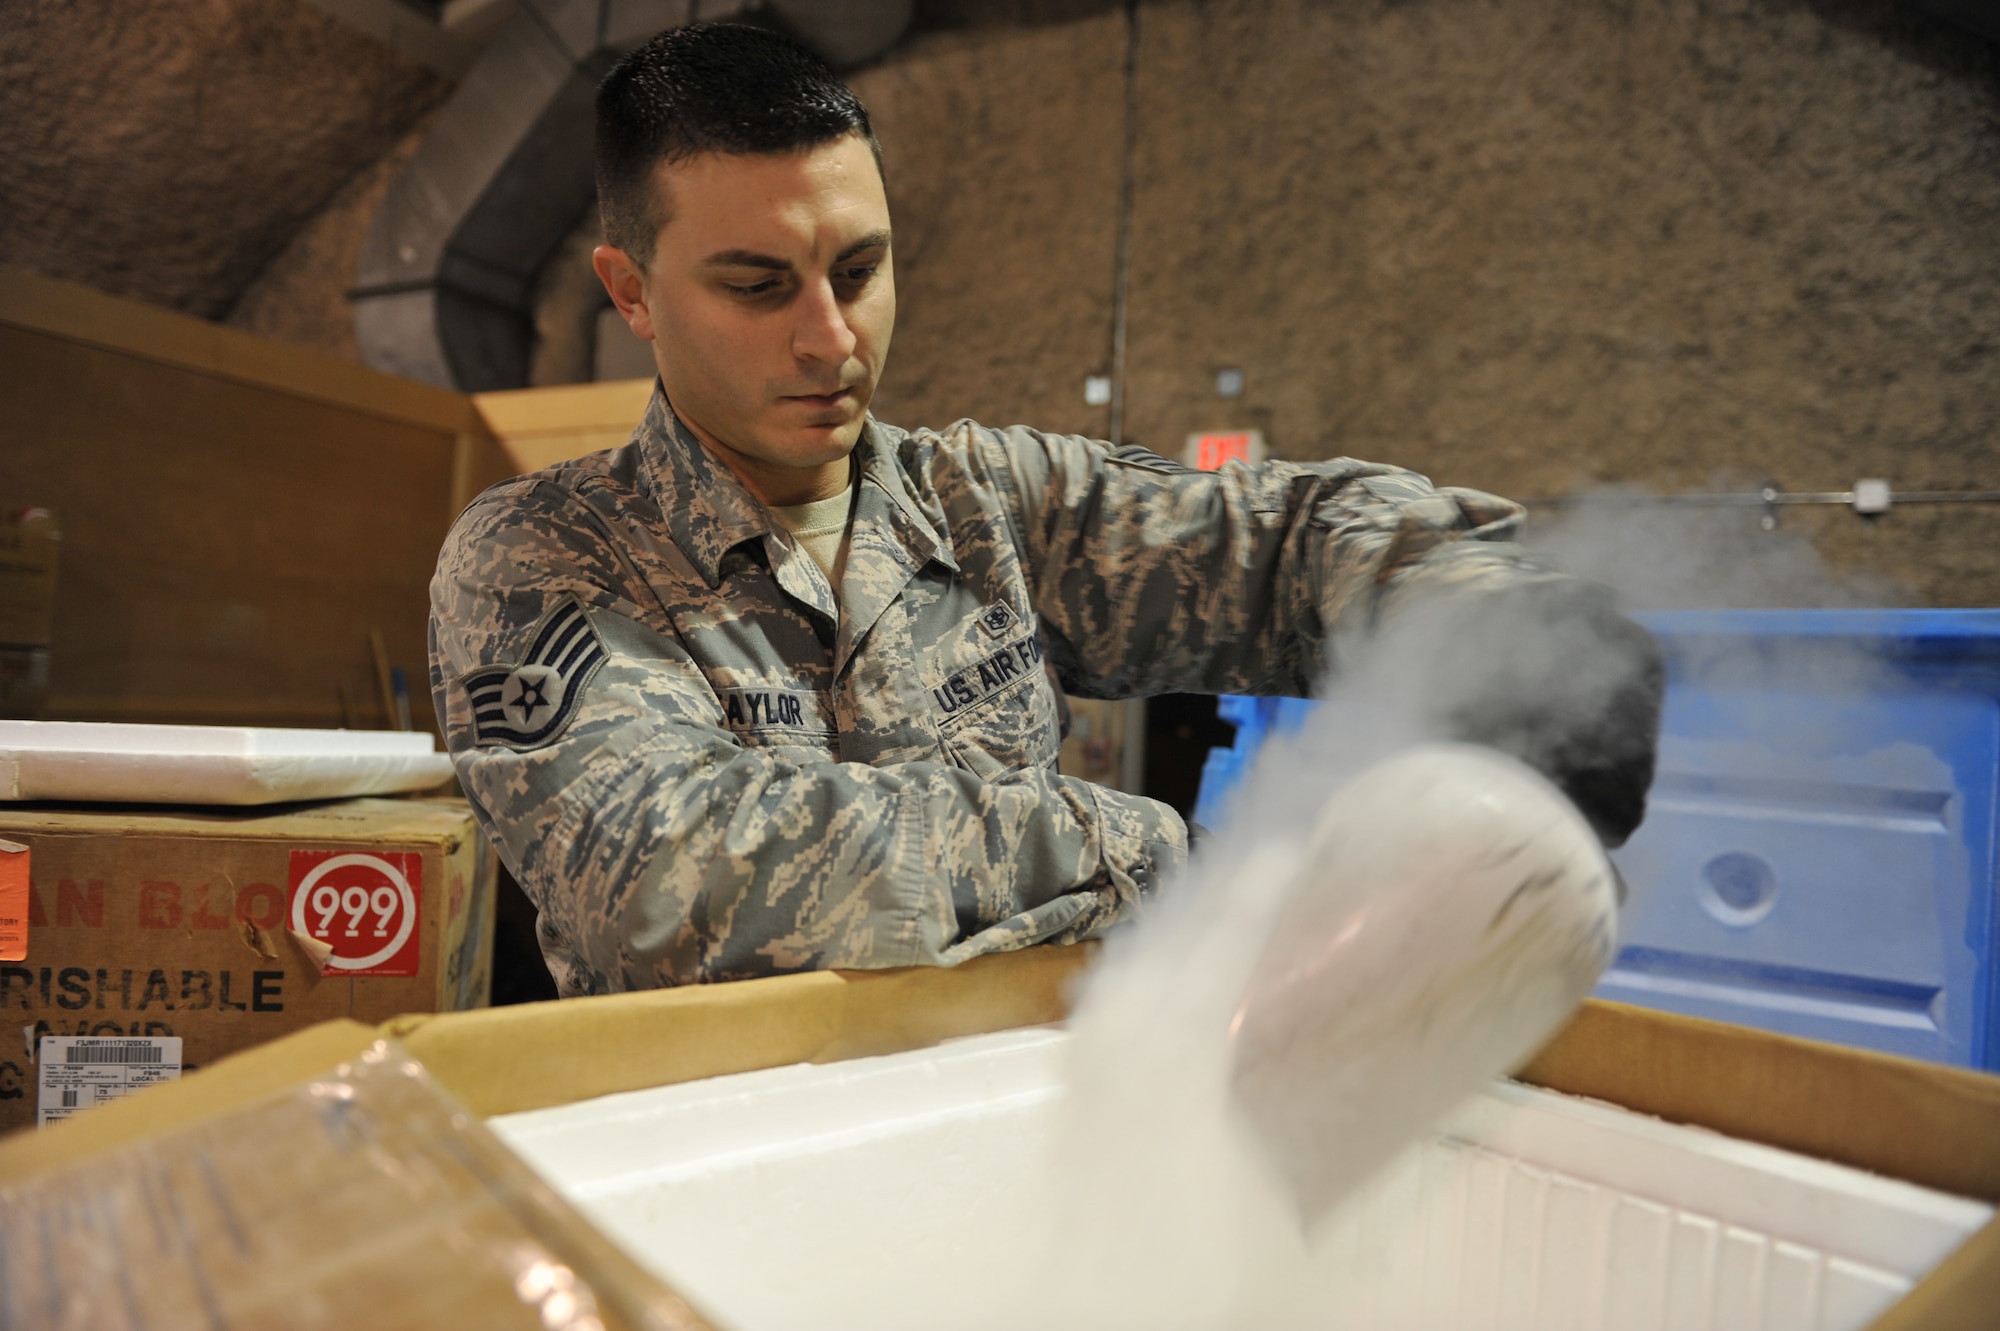 Staff Sgt. Andrew Taylor loads dry ice into a cooler for transport at the 379th Expeditionary Medical Group Blood Transshipment Center, Al Udeid Air Base, Qatar, Jan. 17, 2014. The BTC is the sole source for dry ice in Central Command’s area of responsibility. The BTC receives six tons of dry ice and ships four tons monthly to blood supply detachments. The dry ice is essential for assuring that frozen blood products are safely distributed to outlying forward operating bases. Taylor is a medical logistics technician deployed from Joint Base Langley-Eustis, Va., and is a Hopatcong, N.J., native. (U.S. Air Force photo by Master Sgt. David Miller)